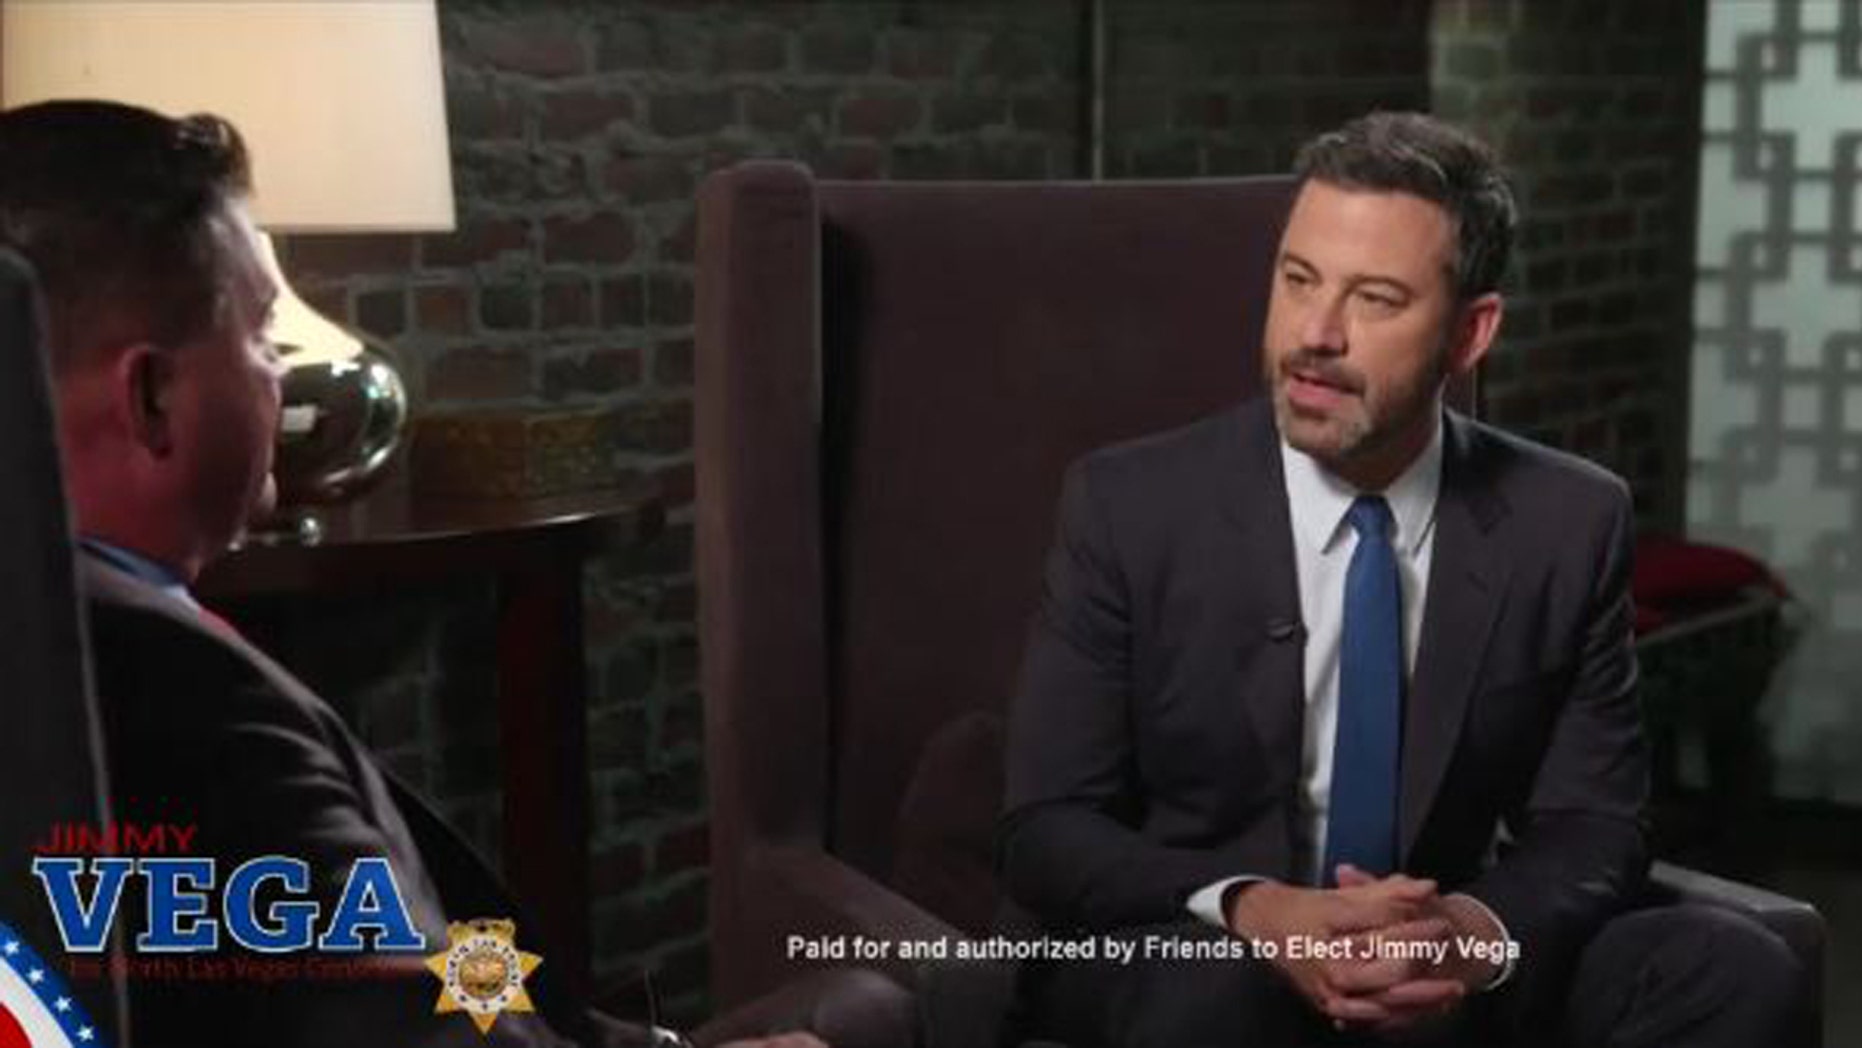 Jimmy Kimmel appears in a campaign video to support his longtime friend Jimmy Vega for North Las Vegas constable. 